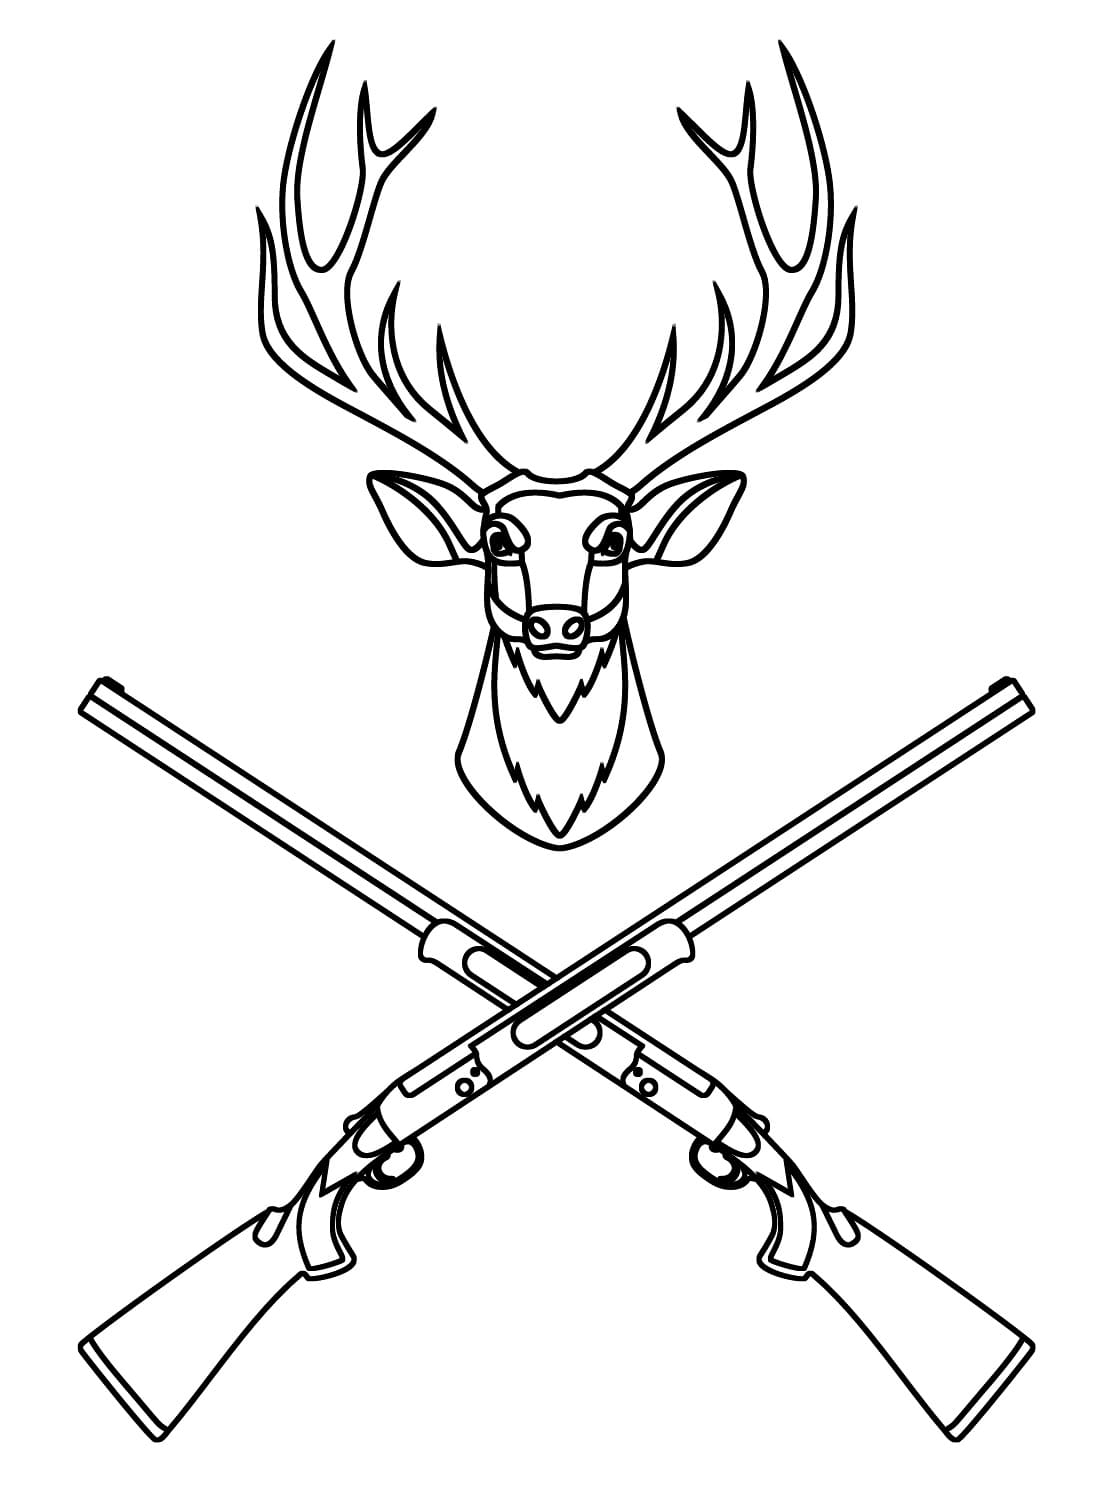 A hunter hunting in the boat coloring page